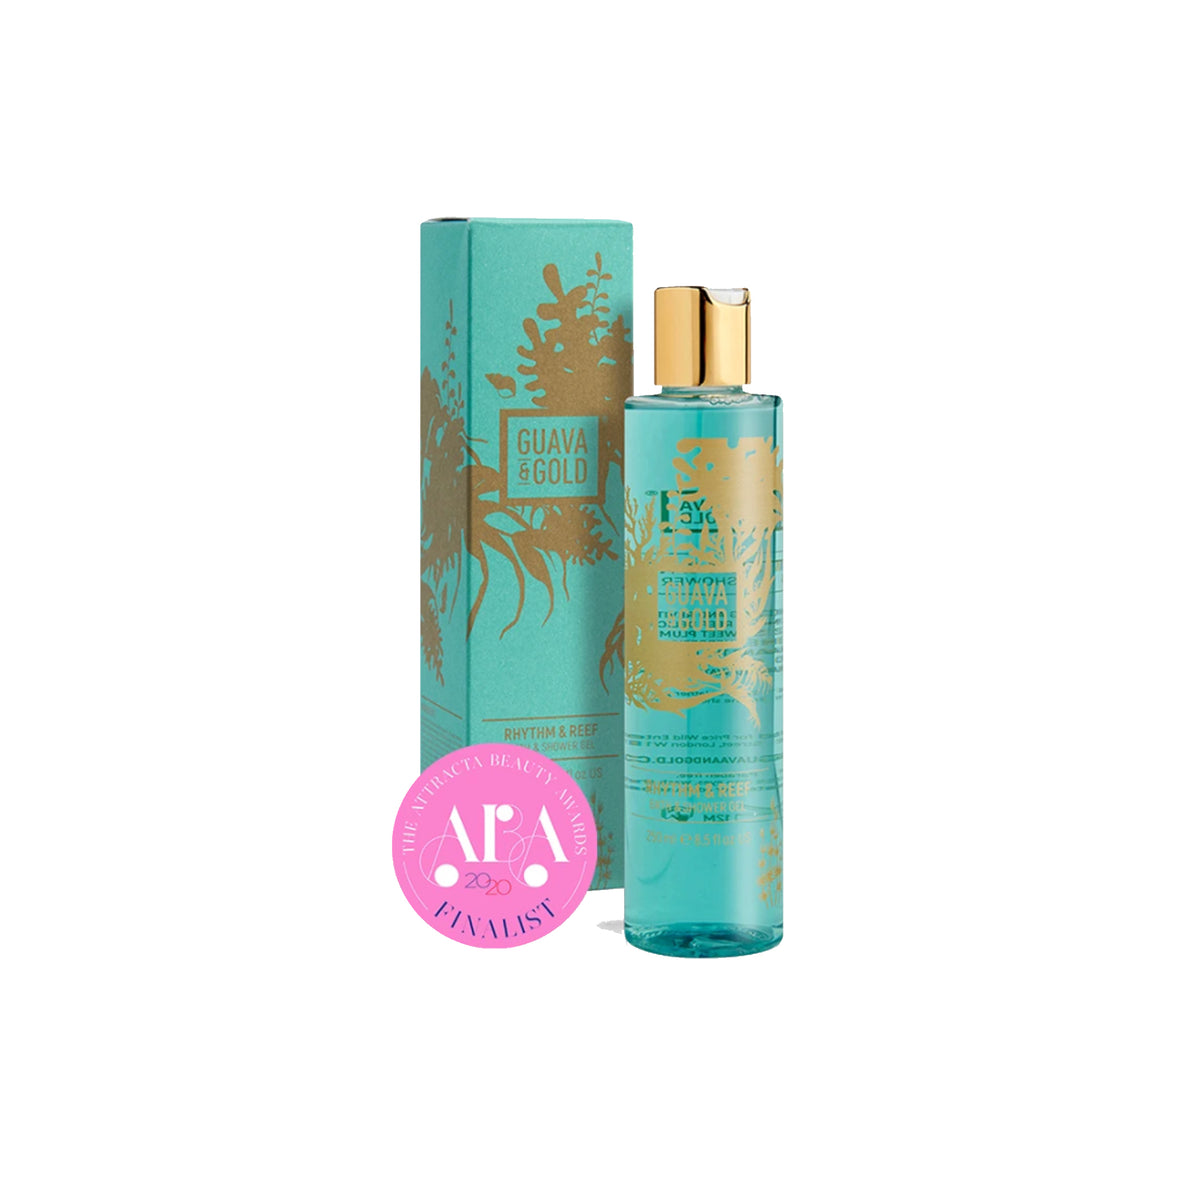 turquoise and gold printed bottle and box of shower gel by Guava and Gold